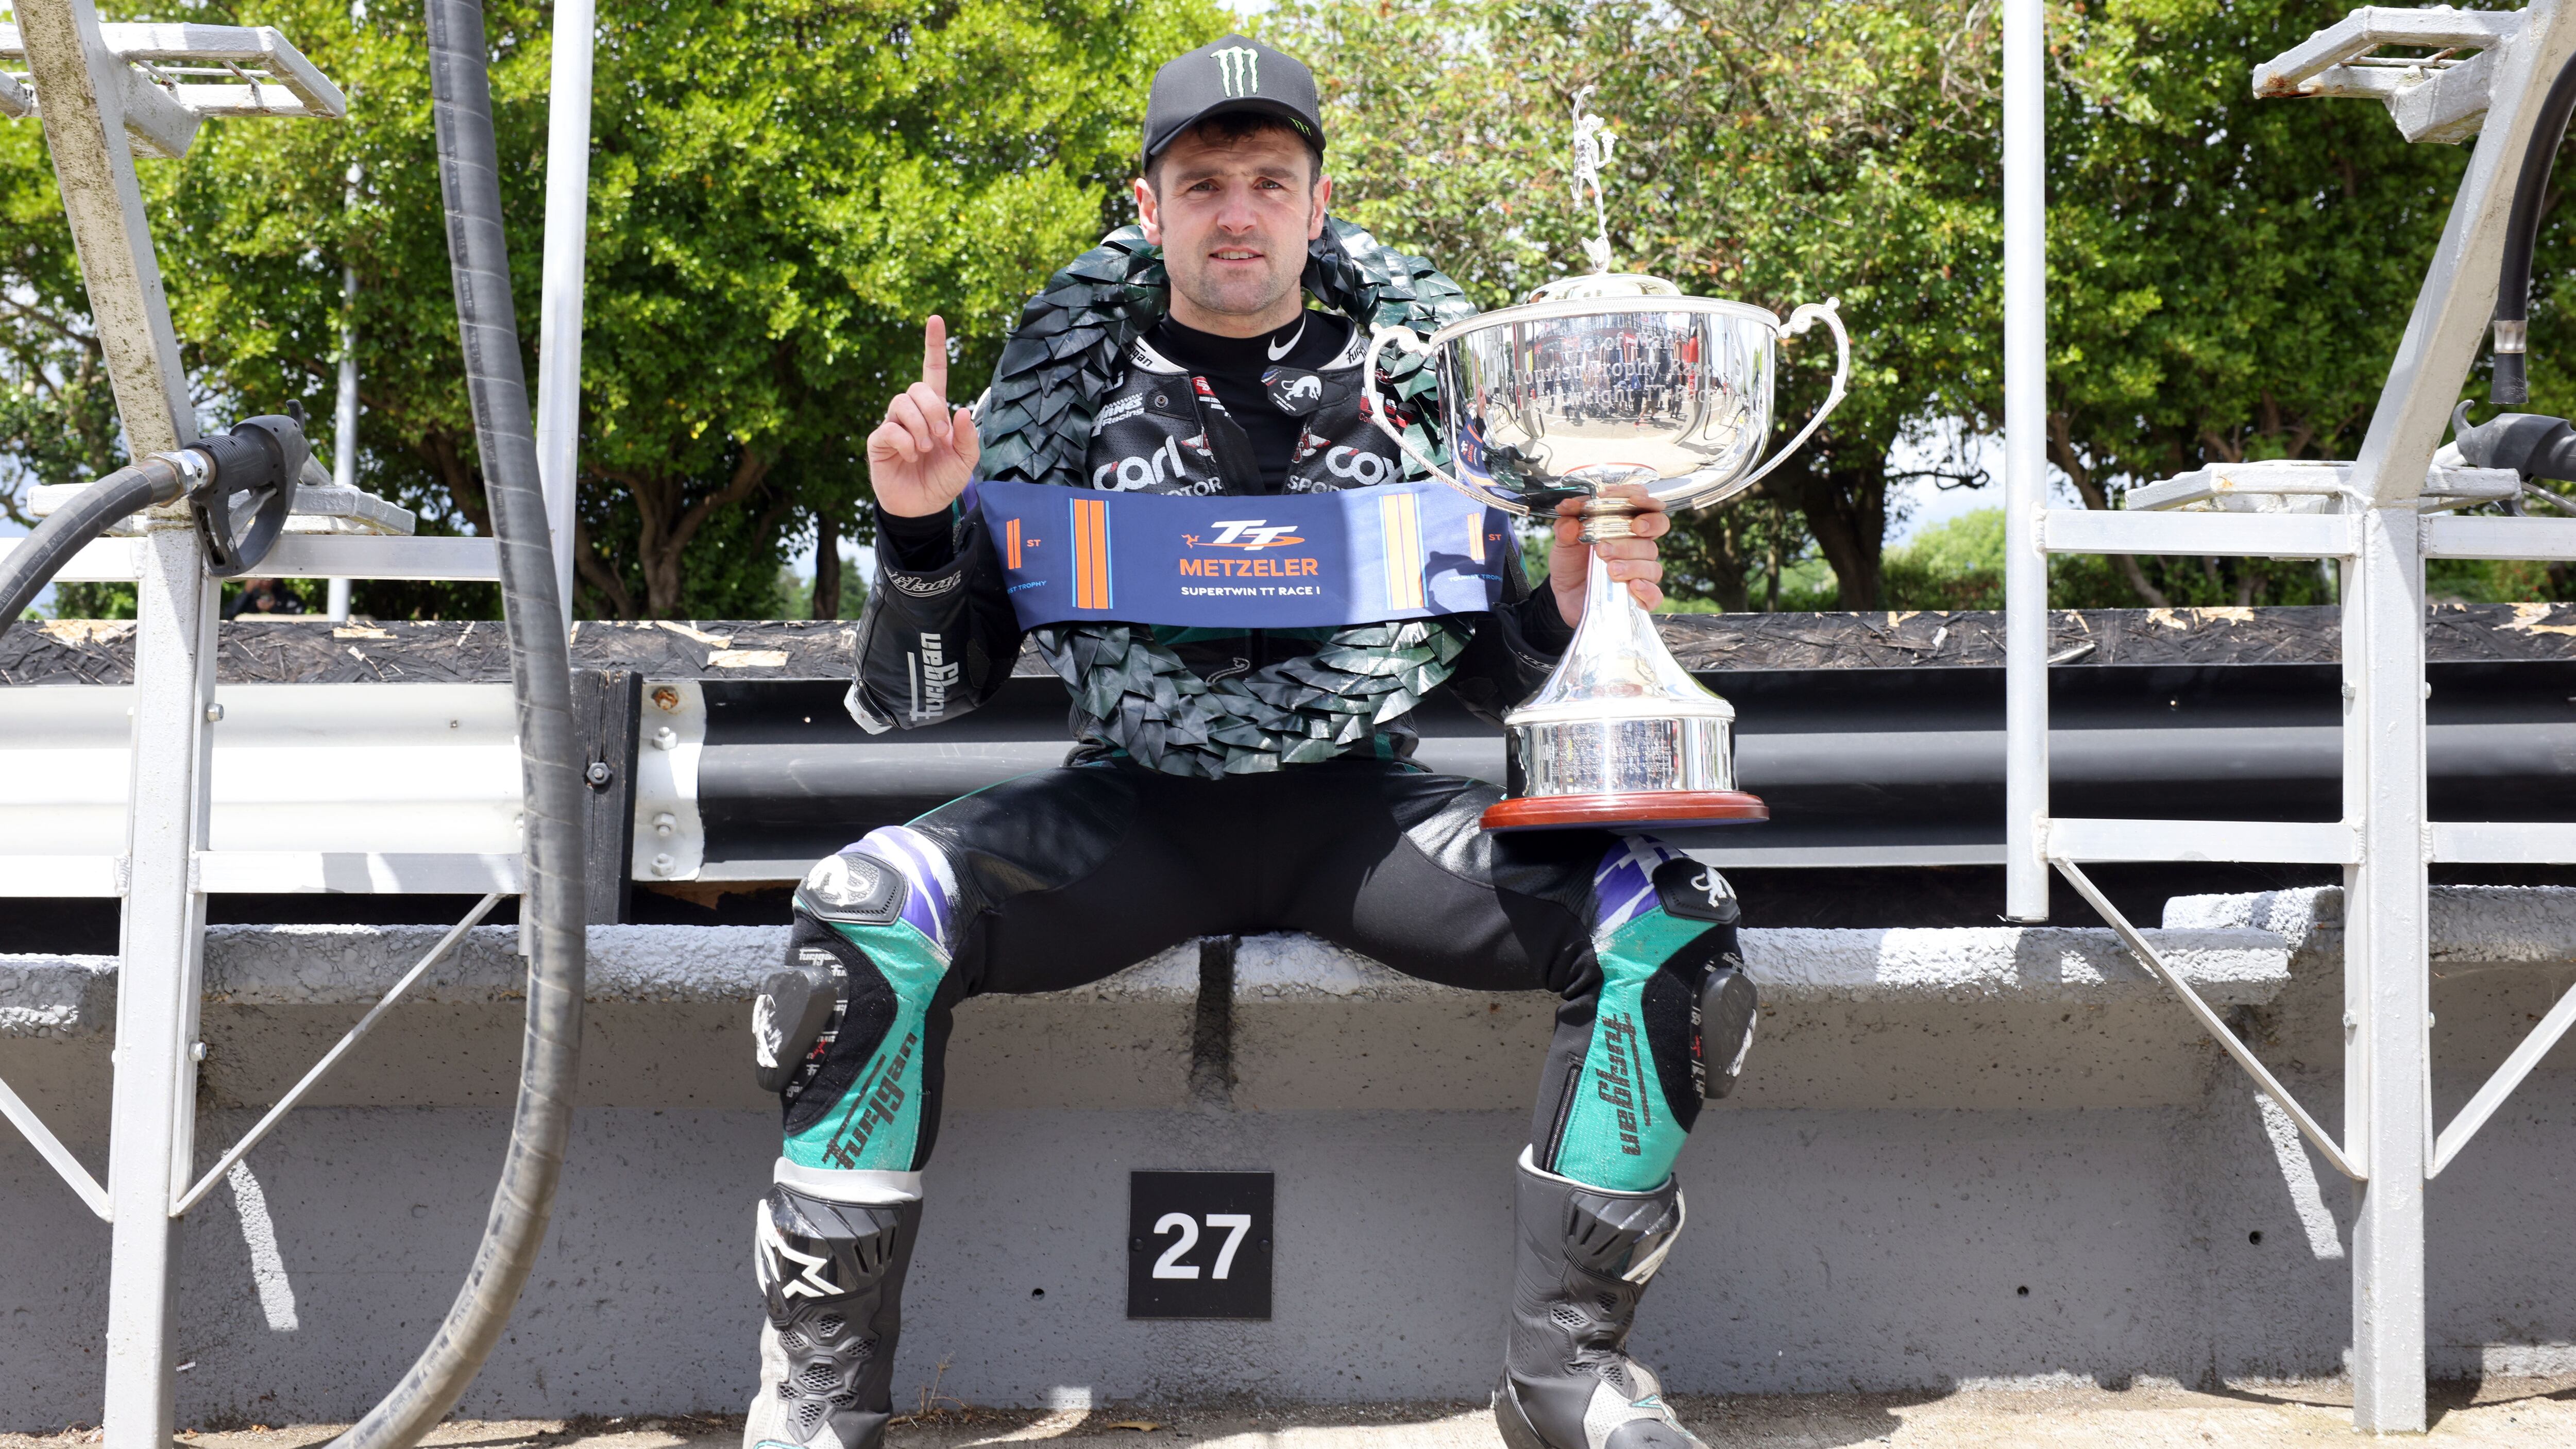 Michael Dunlop sitting with a laurel wreath around his neck and the Metzeler Supertwin trophy in his hand, under him is a sign that says 27